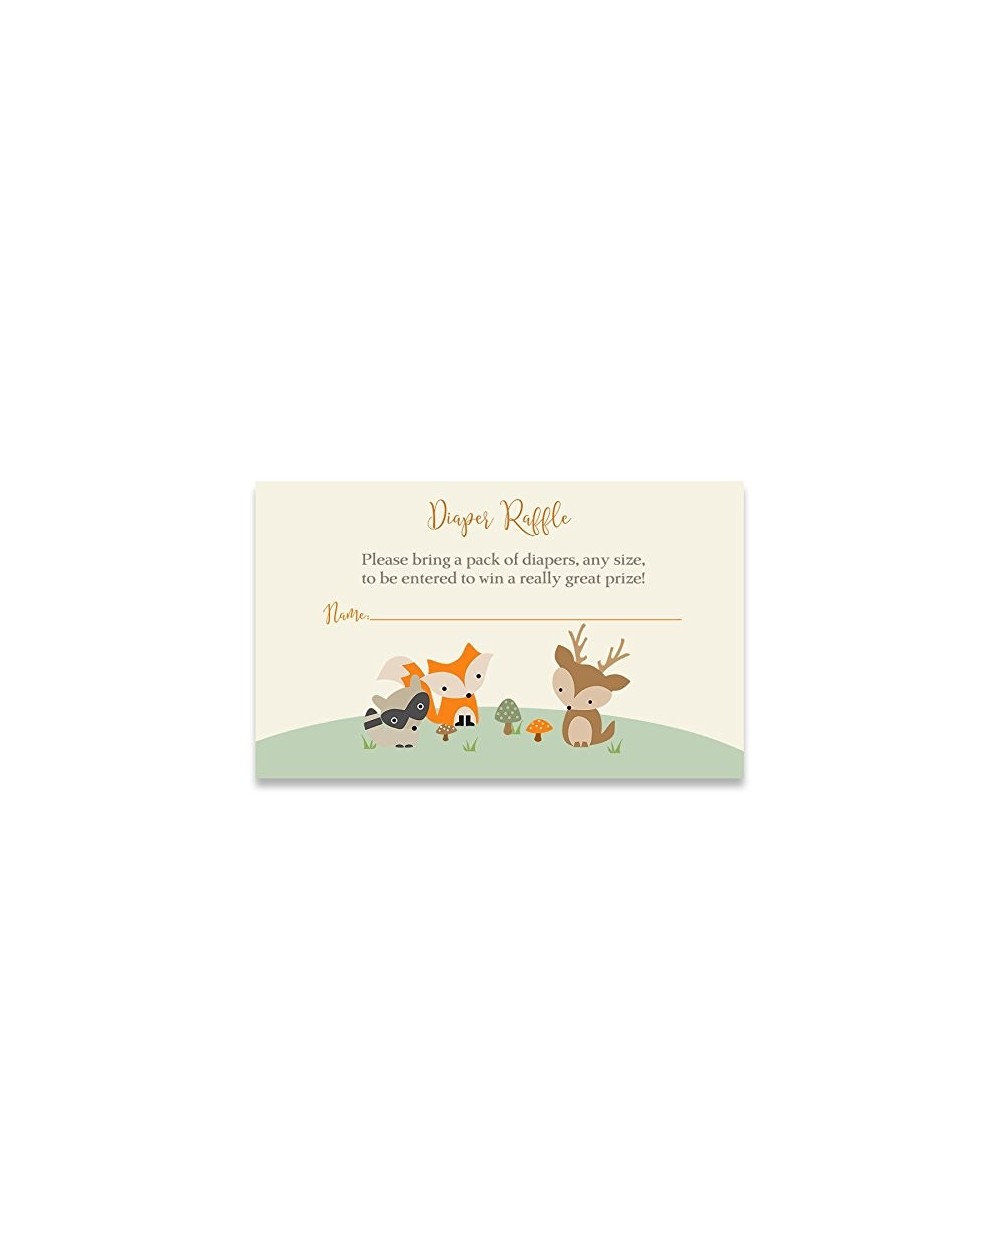 Invitations Woodland Friends Diaper Raffle Tickets Forest Friends Baby Shower Diaper Party Cards Nature Zoo Animals Fox Deer ...